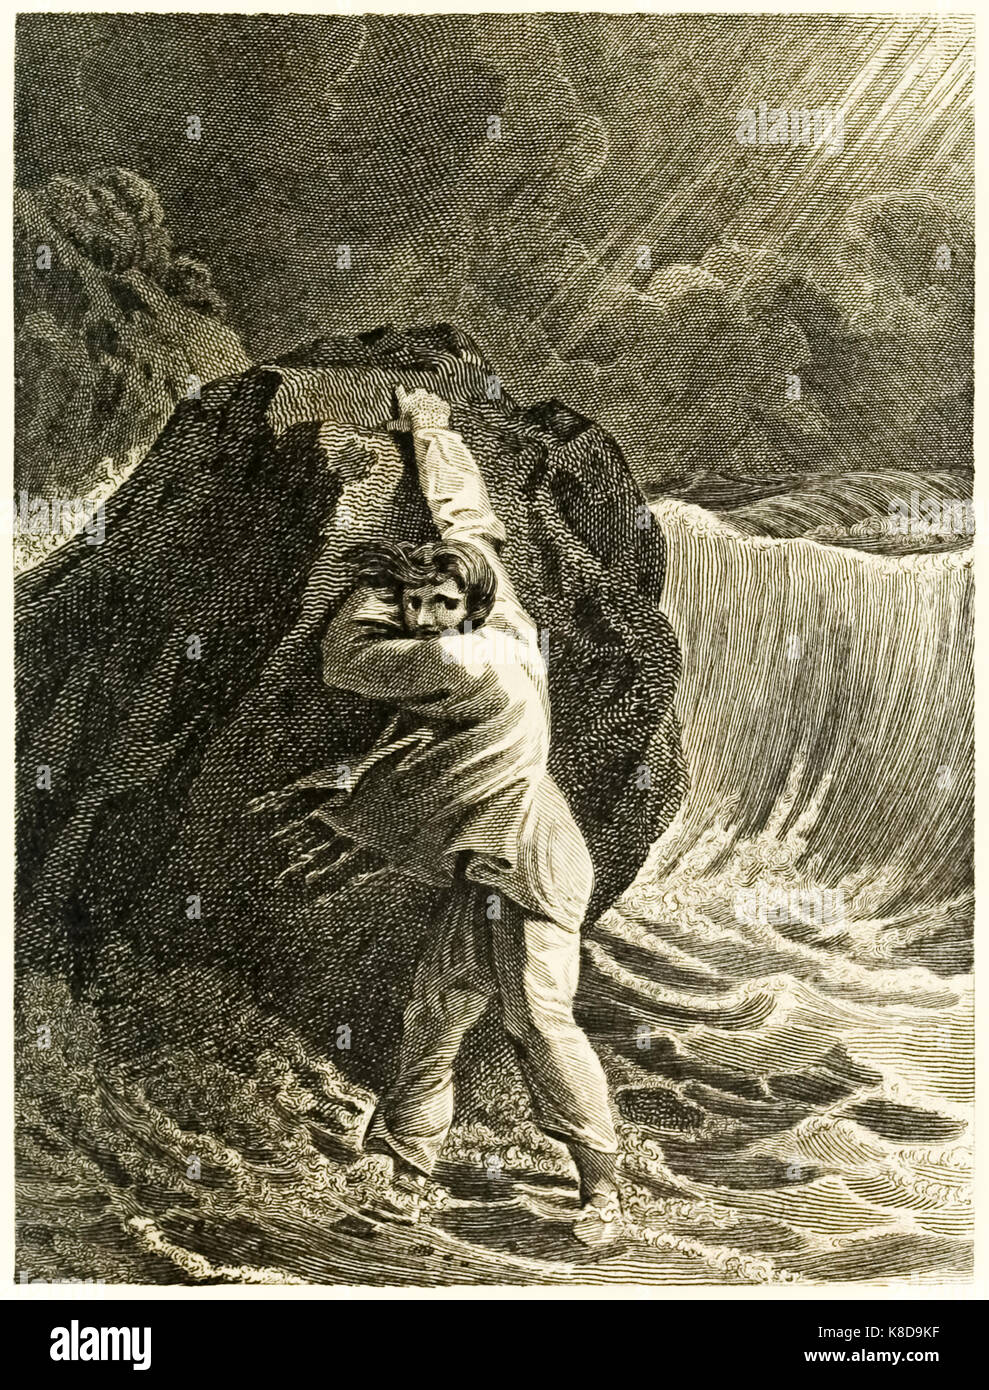 ‘Robinson Crusoe shipwrecked and clinging to a Rock’ from “The Life and Strange Surprising Adventures of Robinson Crusoe, or York, Mariner” by Daniel Defoe (1660-1731). Illustration by Thomas Stothard (1755-1834) engraving by Thomas Medland (1765-1833). See more information below. Stock Photo